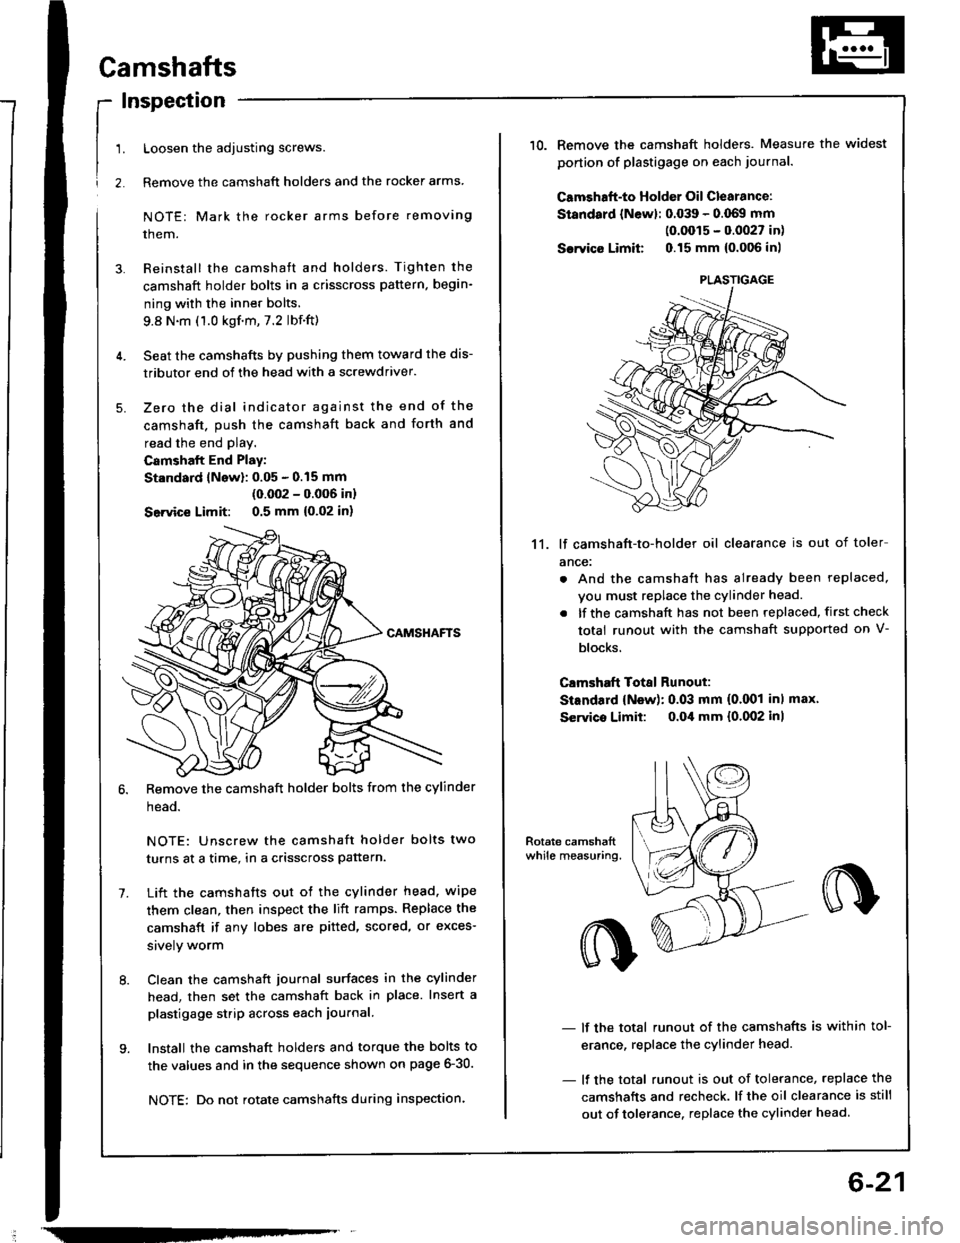 HONDA INTEGRA 1994 4.G Workshop Manual !
1.
2.
Camshafts
Inspection
Loosen the adjusting screws.
Remove the camshaft holders and the rocker arms
NOTE: Mark the rocker arms before removing
them.
Reinstall the camshaft and holders. Tighten t